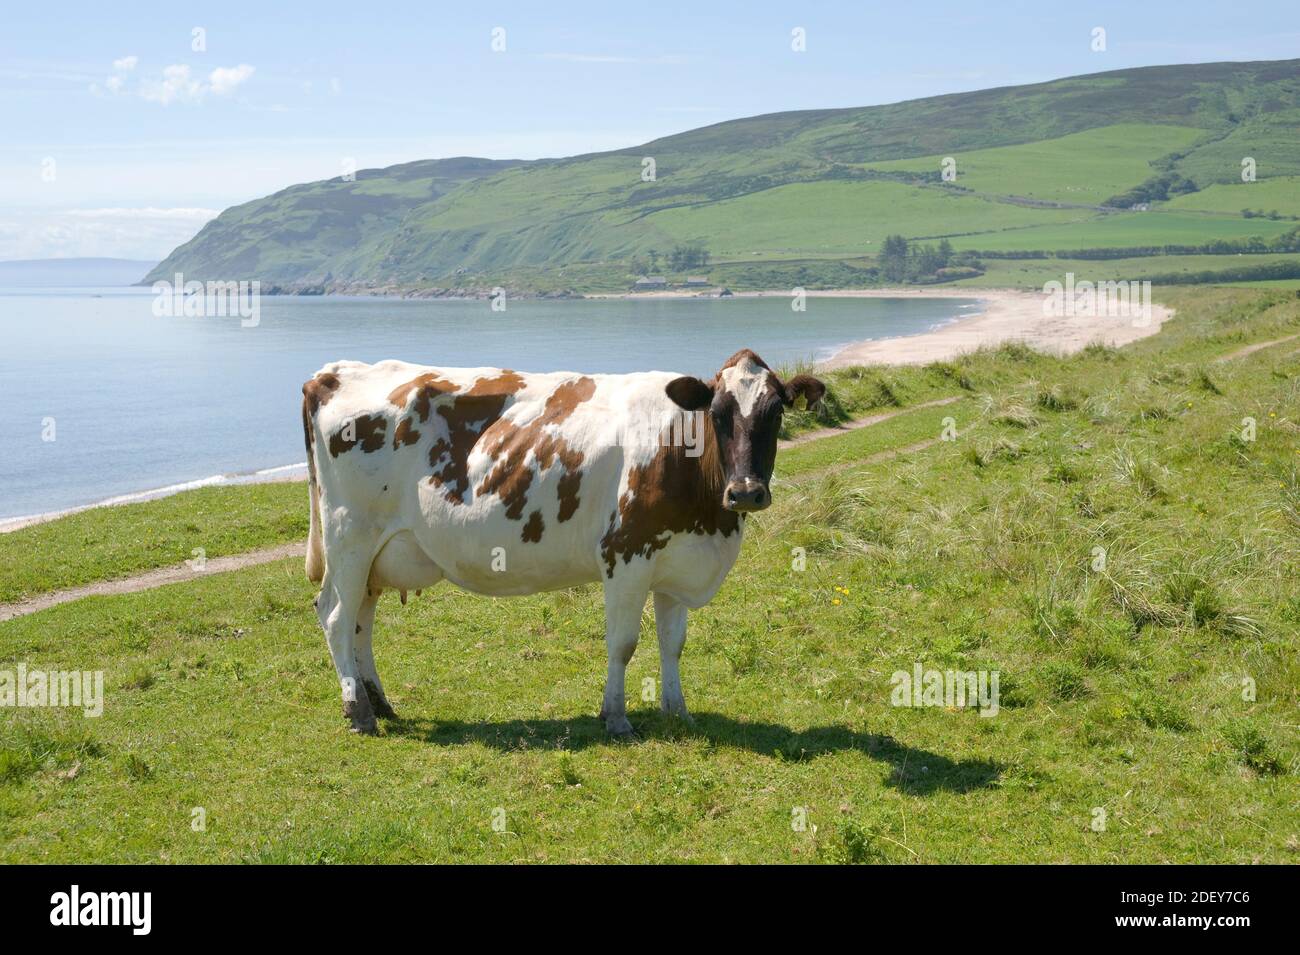 Ayrshire Dairy Cow at Southend, Kintyre. Stock Photo